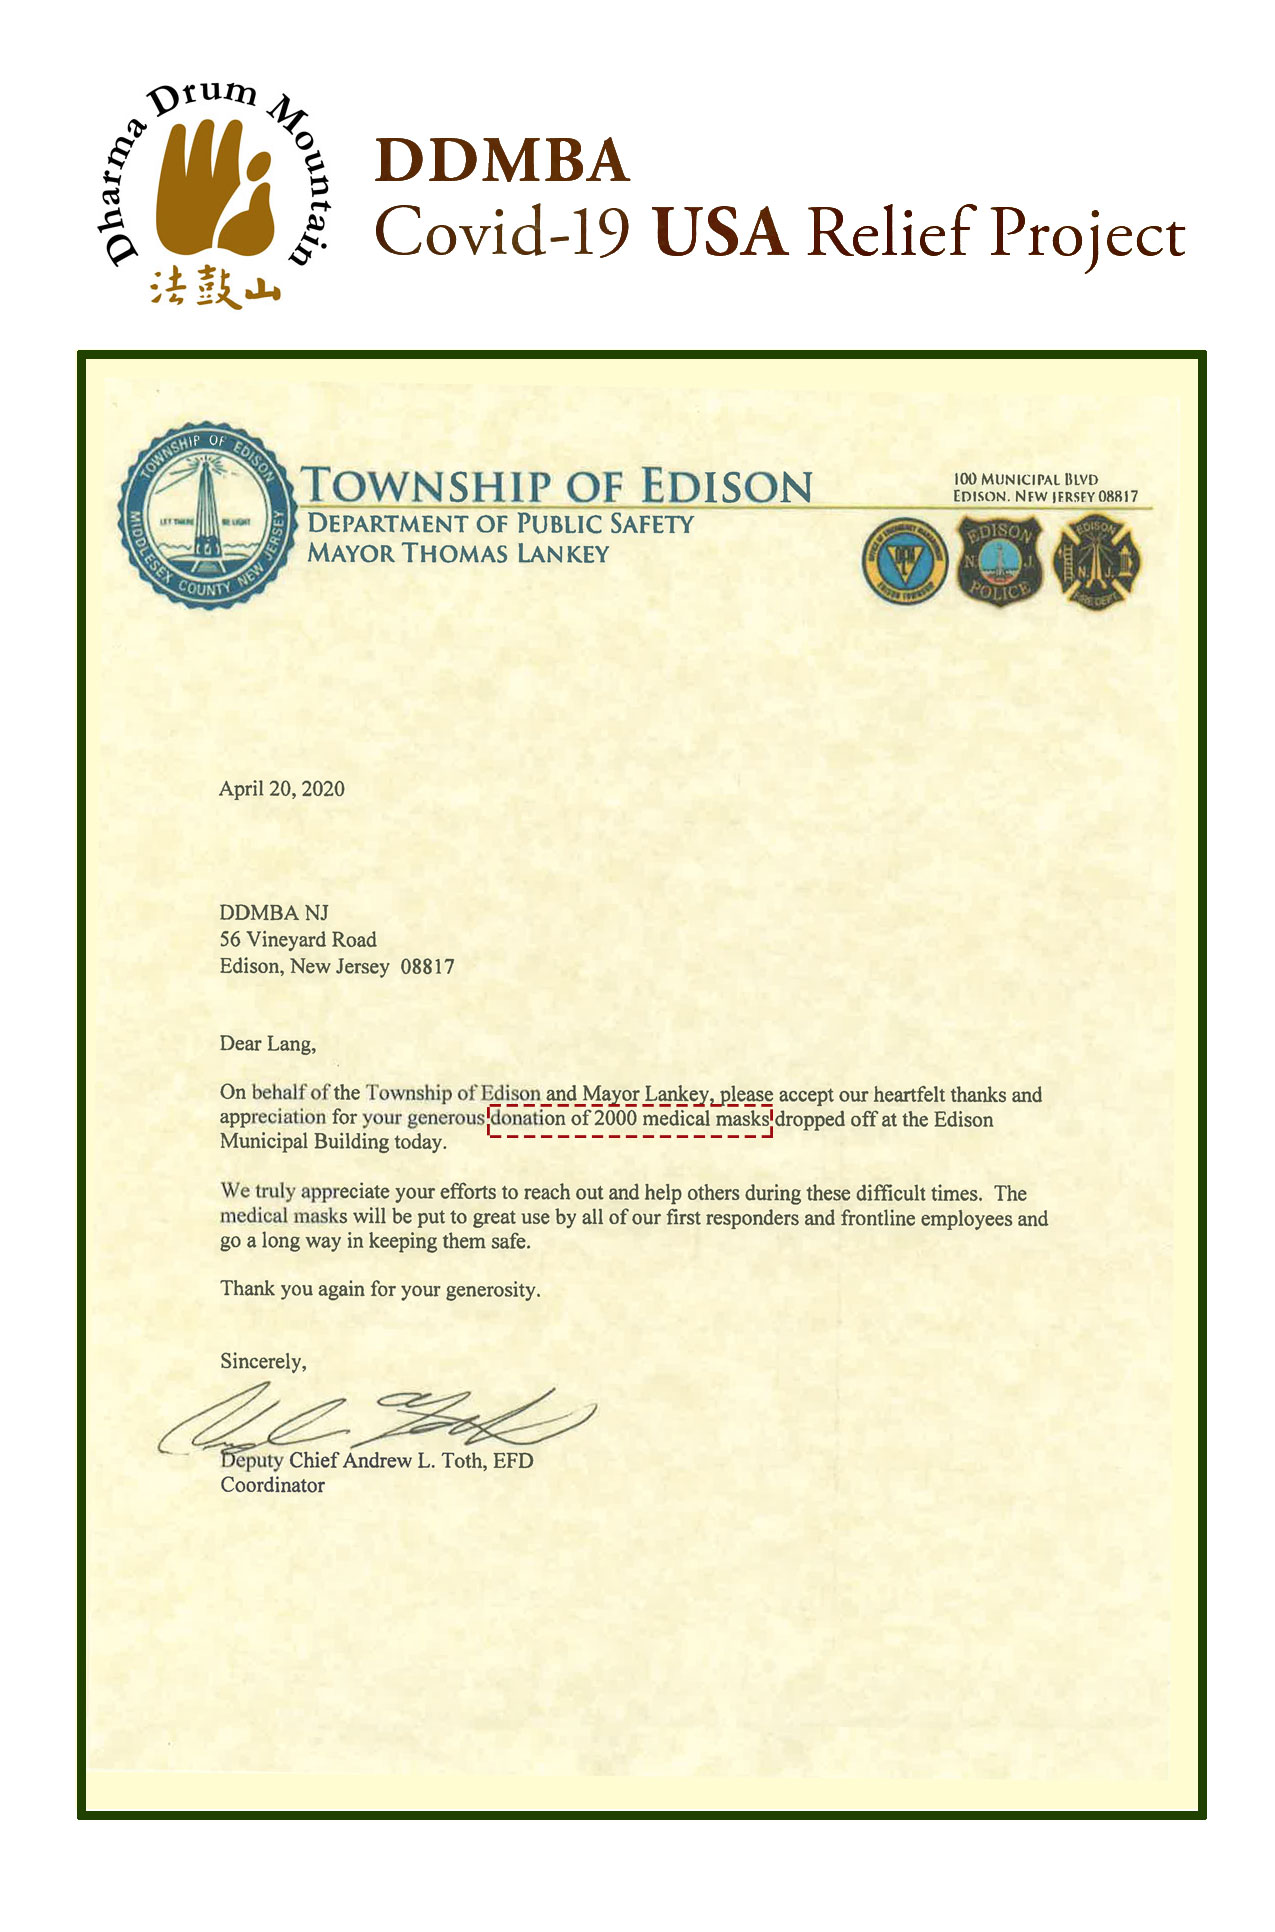 DDMBA USA COVID-19 Relief Project Delivery Report - New Jersey - Township of Edison